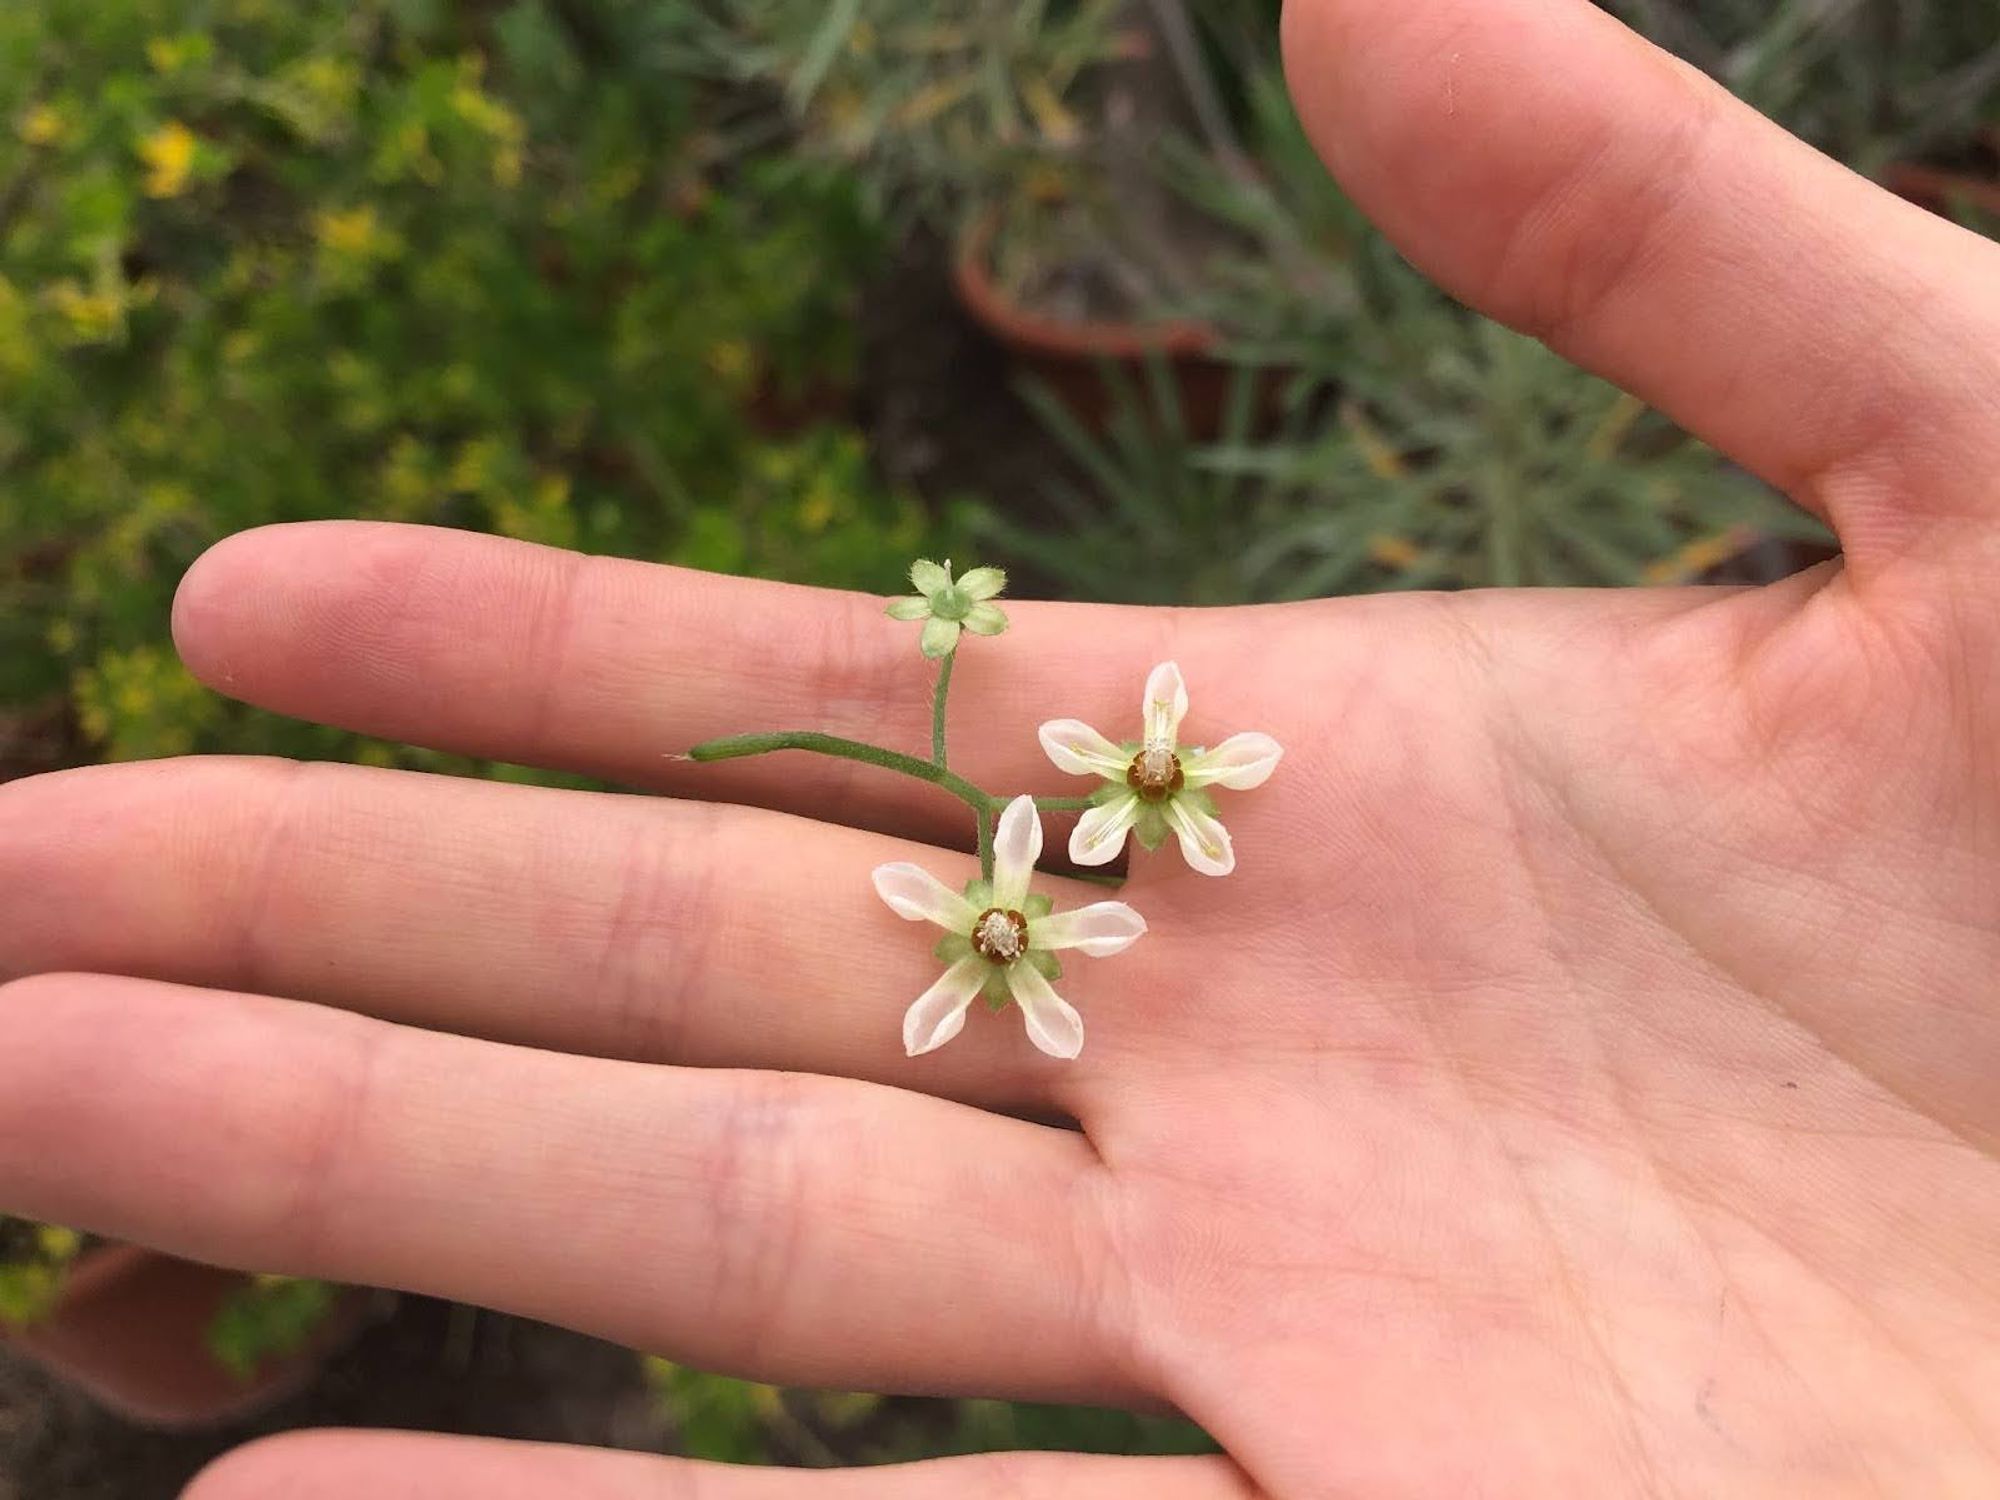 Three tiny flowers resting in someone's hand